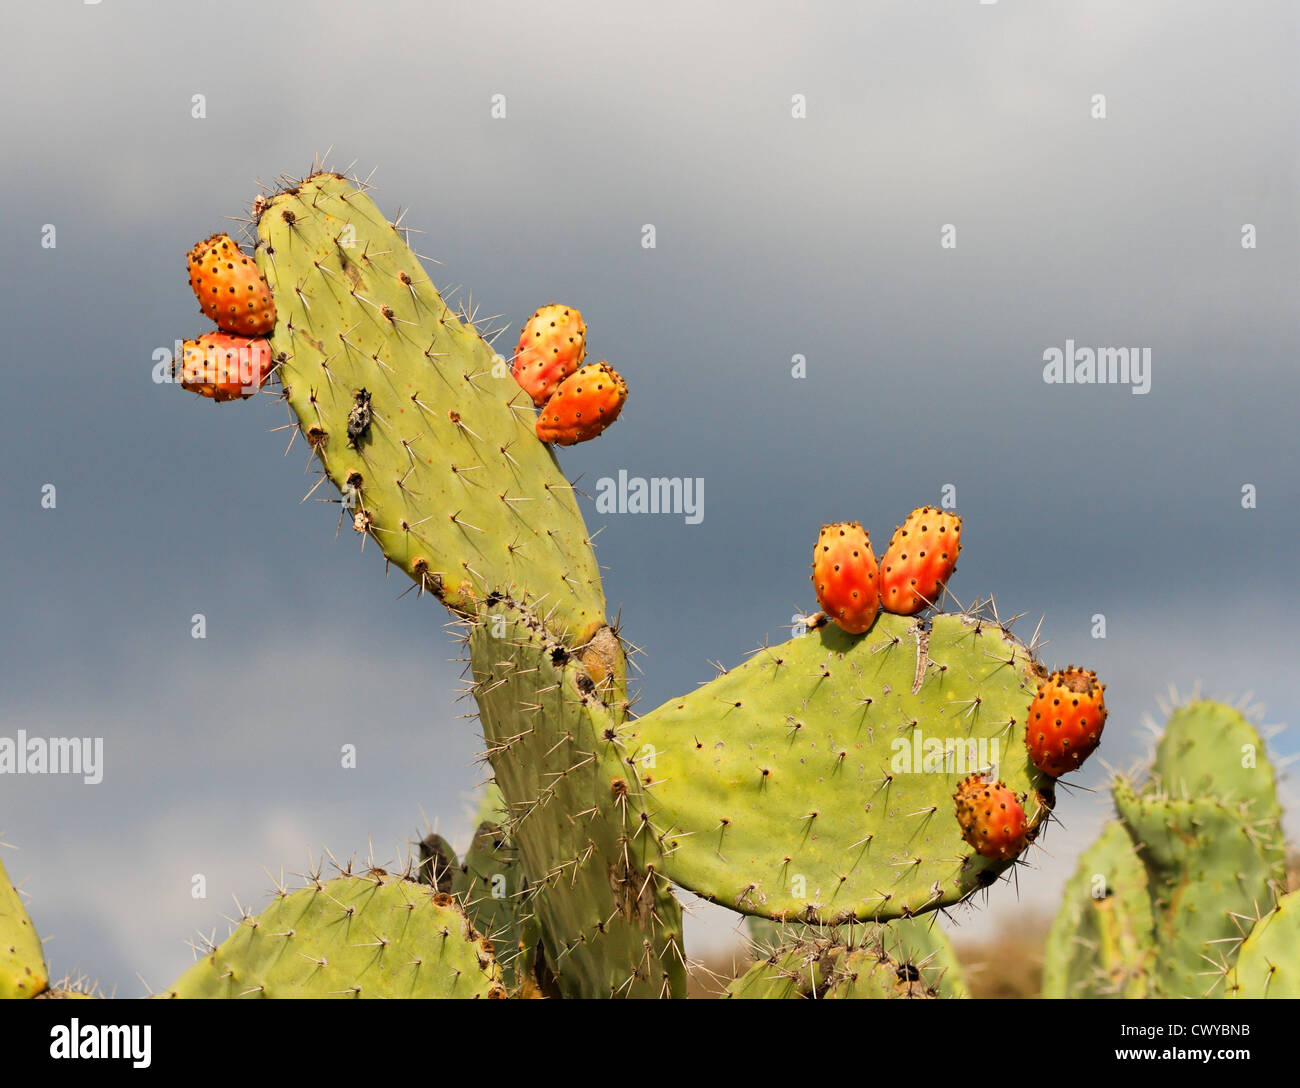 Sabras fruits of tzabar cactus, or prickly pear (Opuntia ficus Indica) on cloudy autumn day Stock Photo